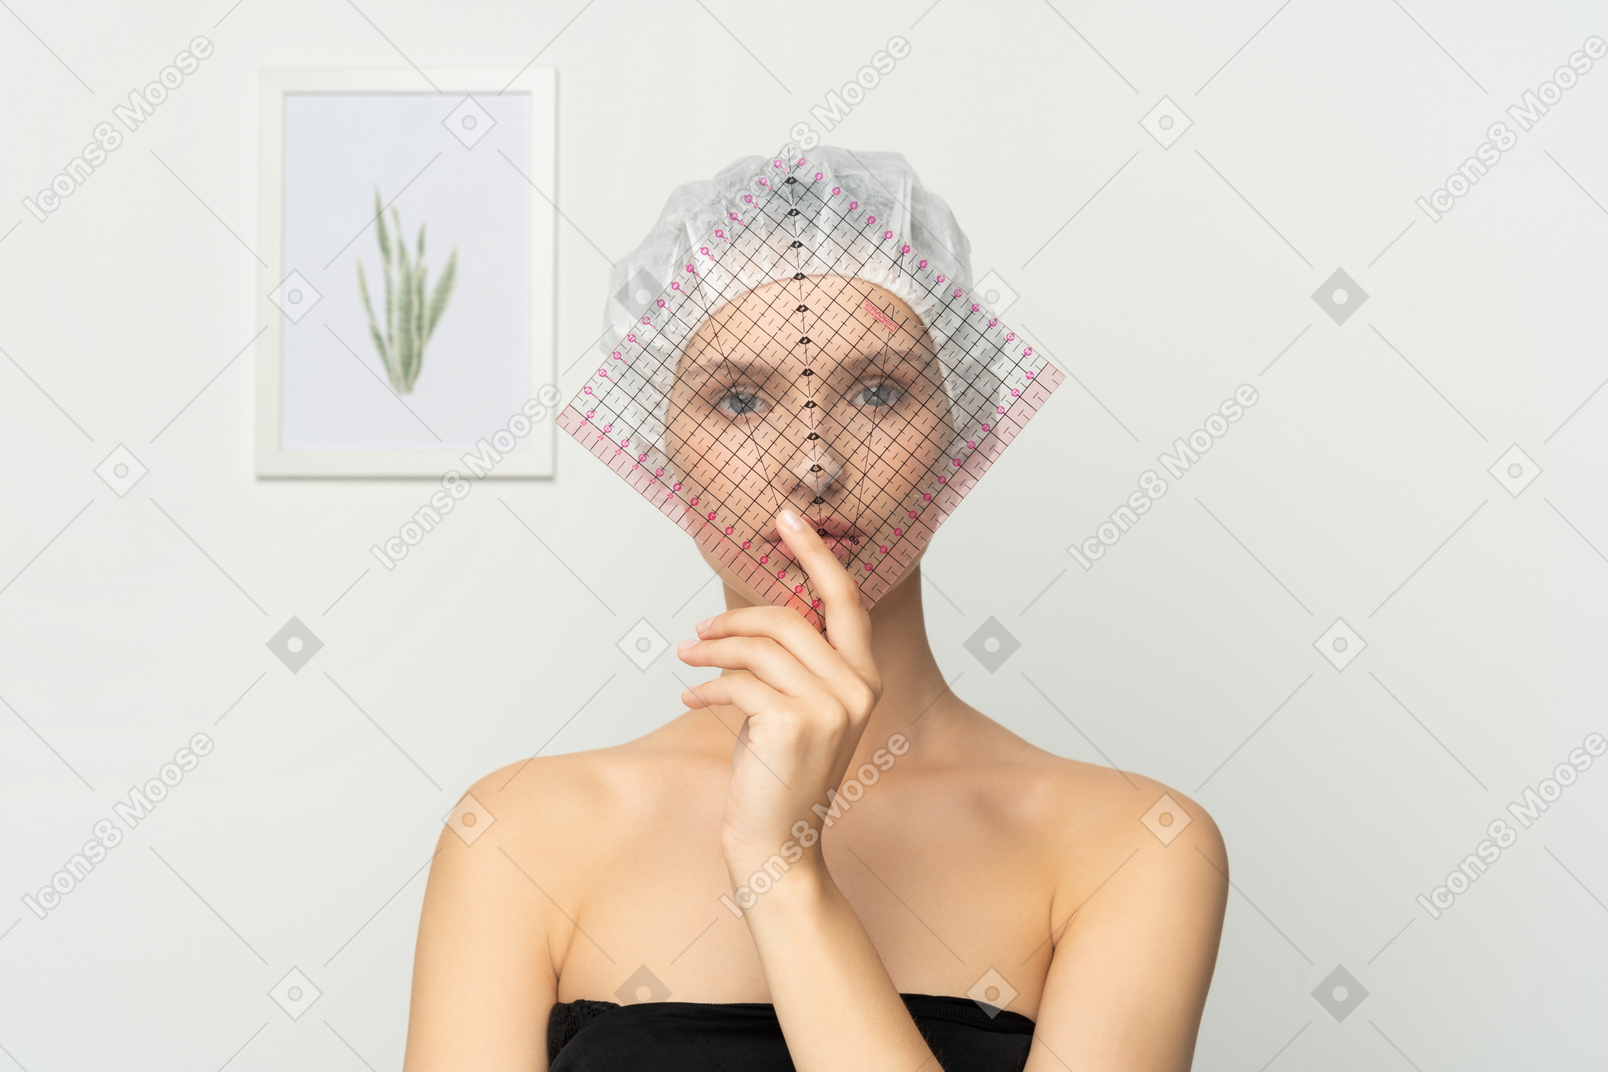 Young woman holding a plastic grid over her face